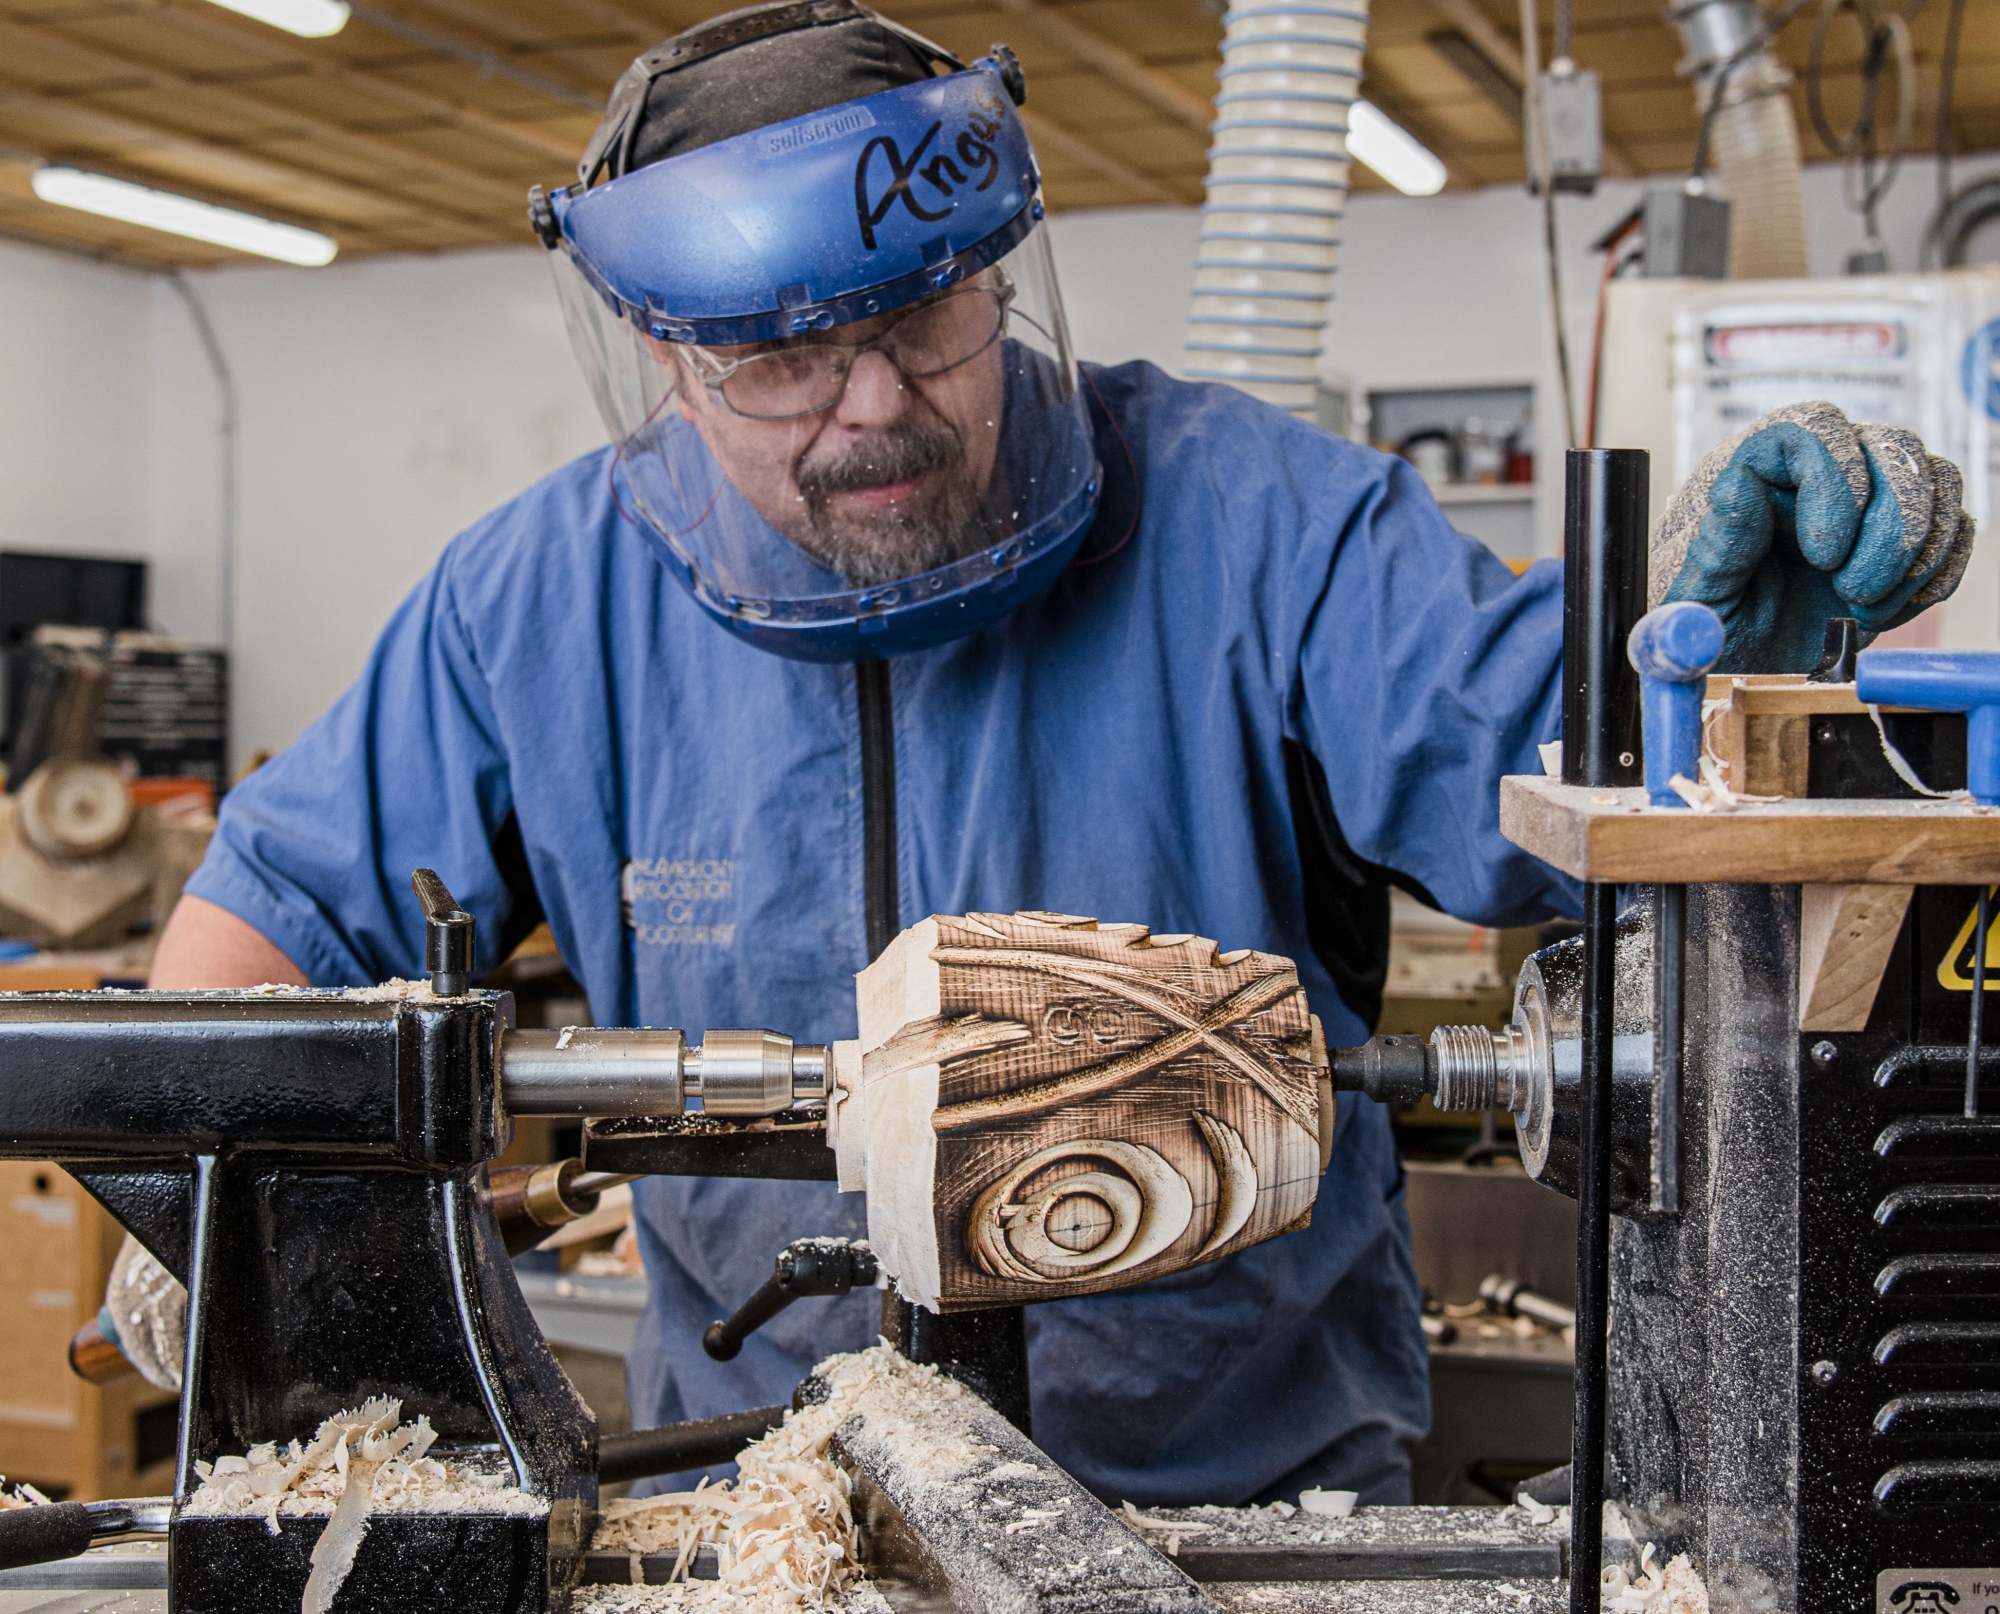 woor carving, lathe carving